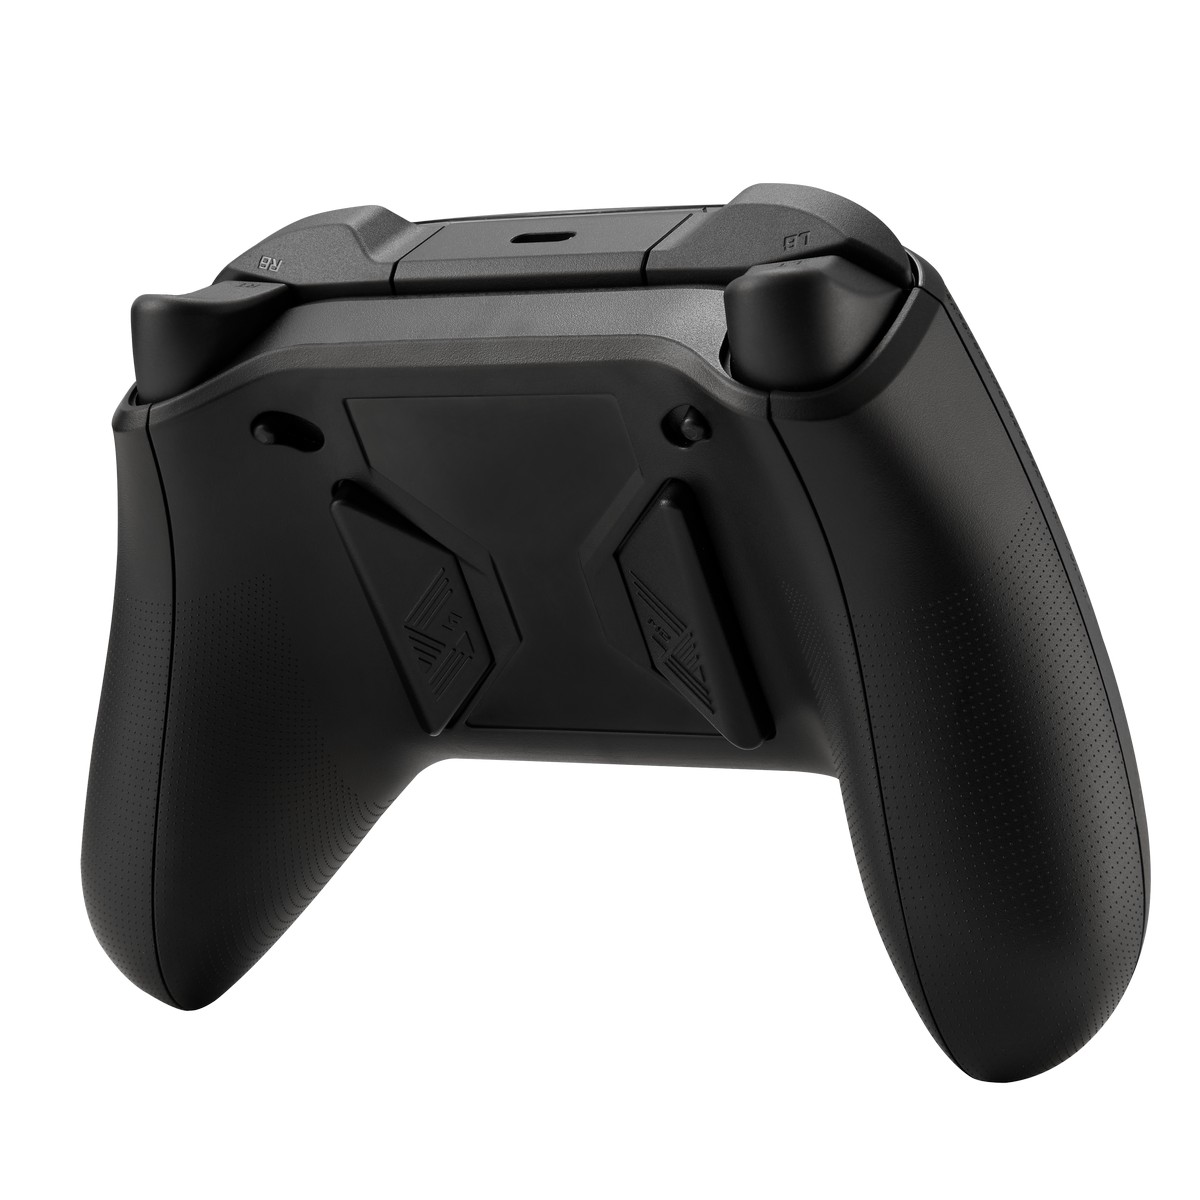 Asus ROG Raikiri officially licensed XBOX controller For PC and XBOX